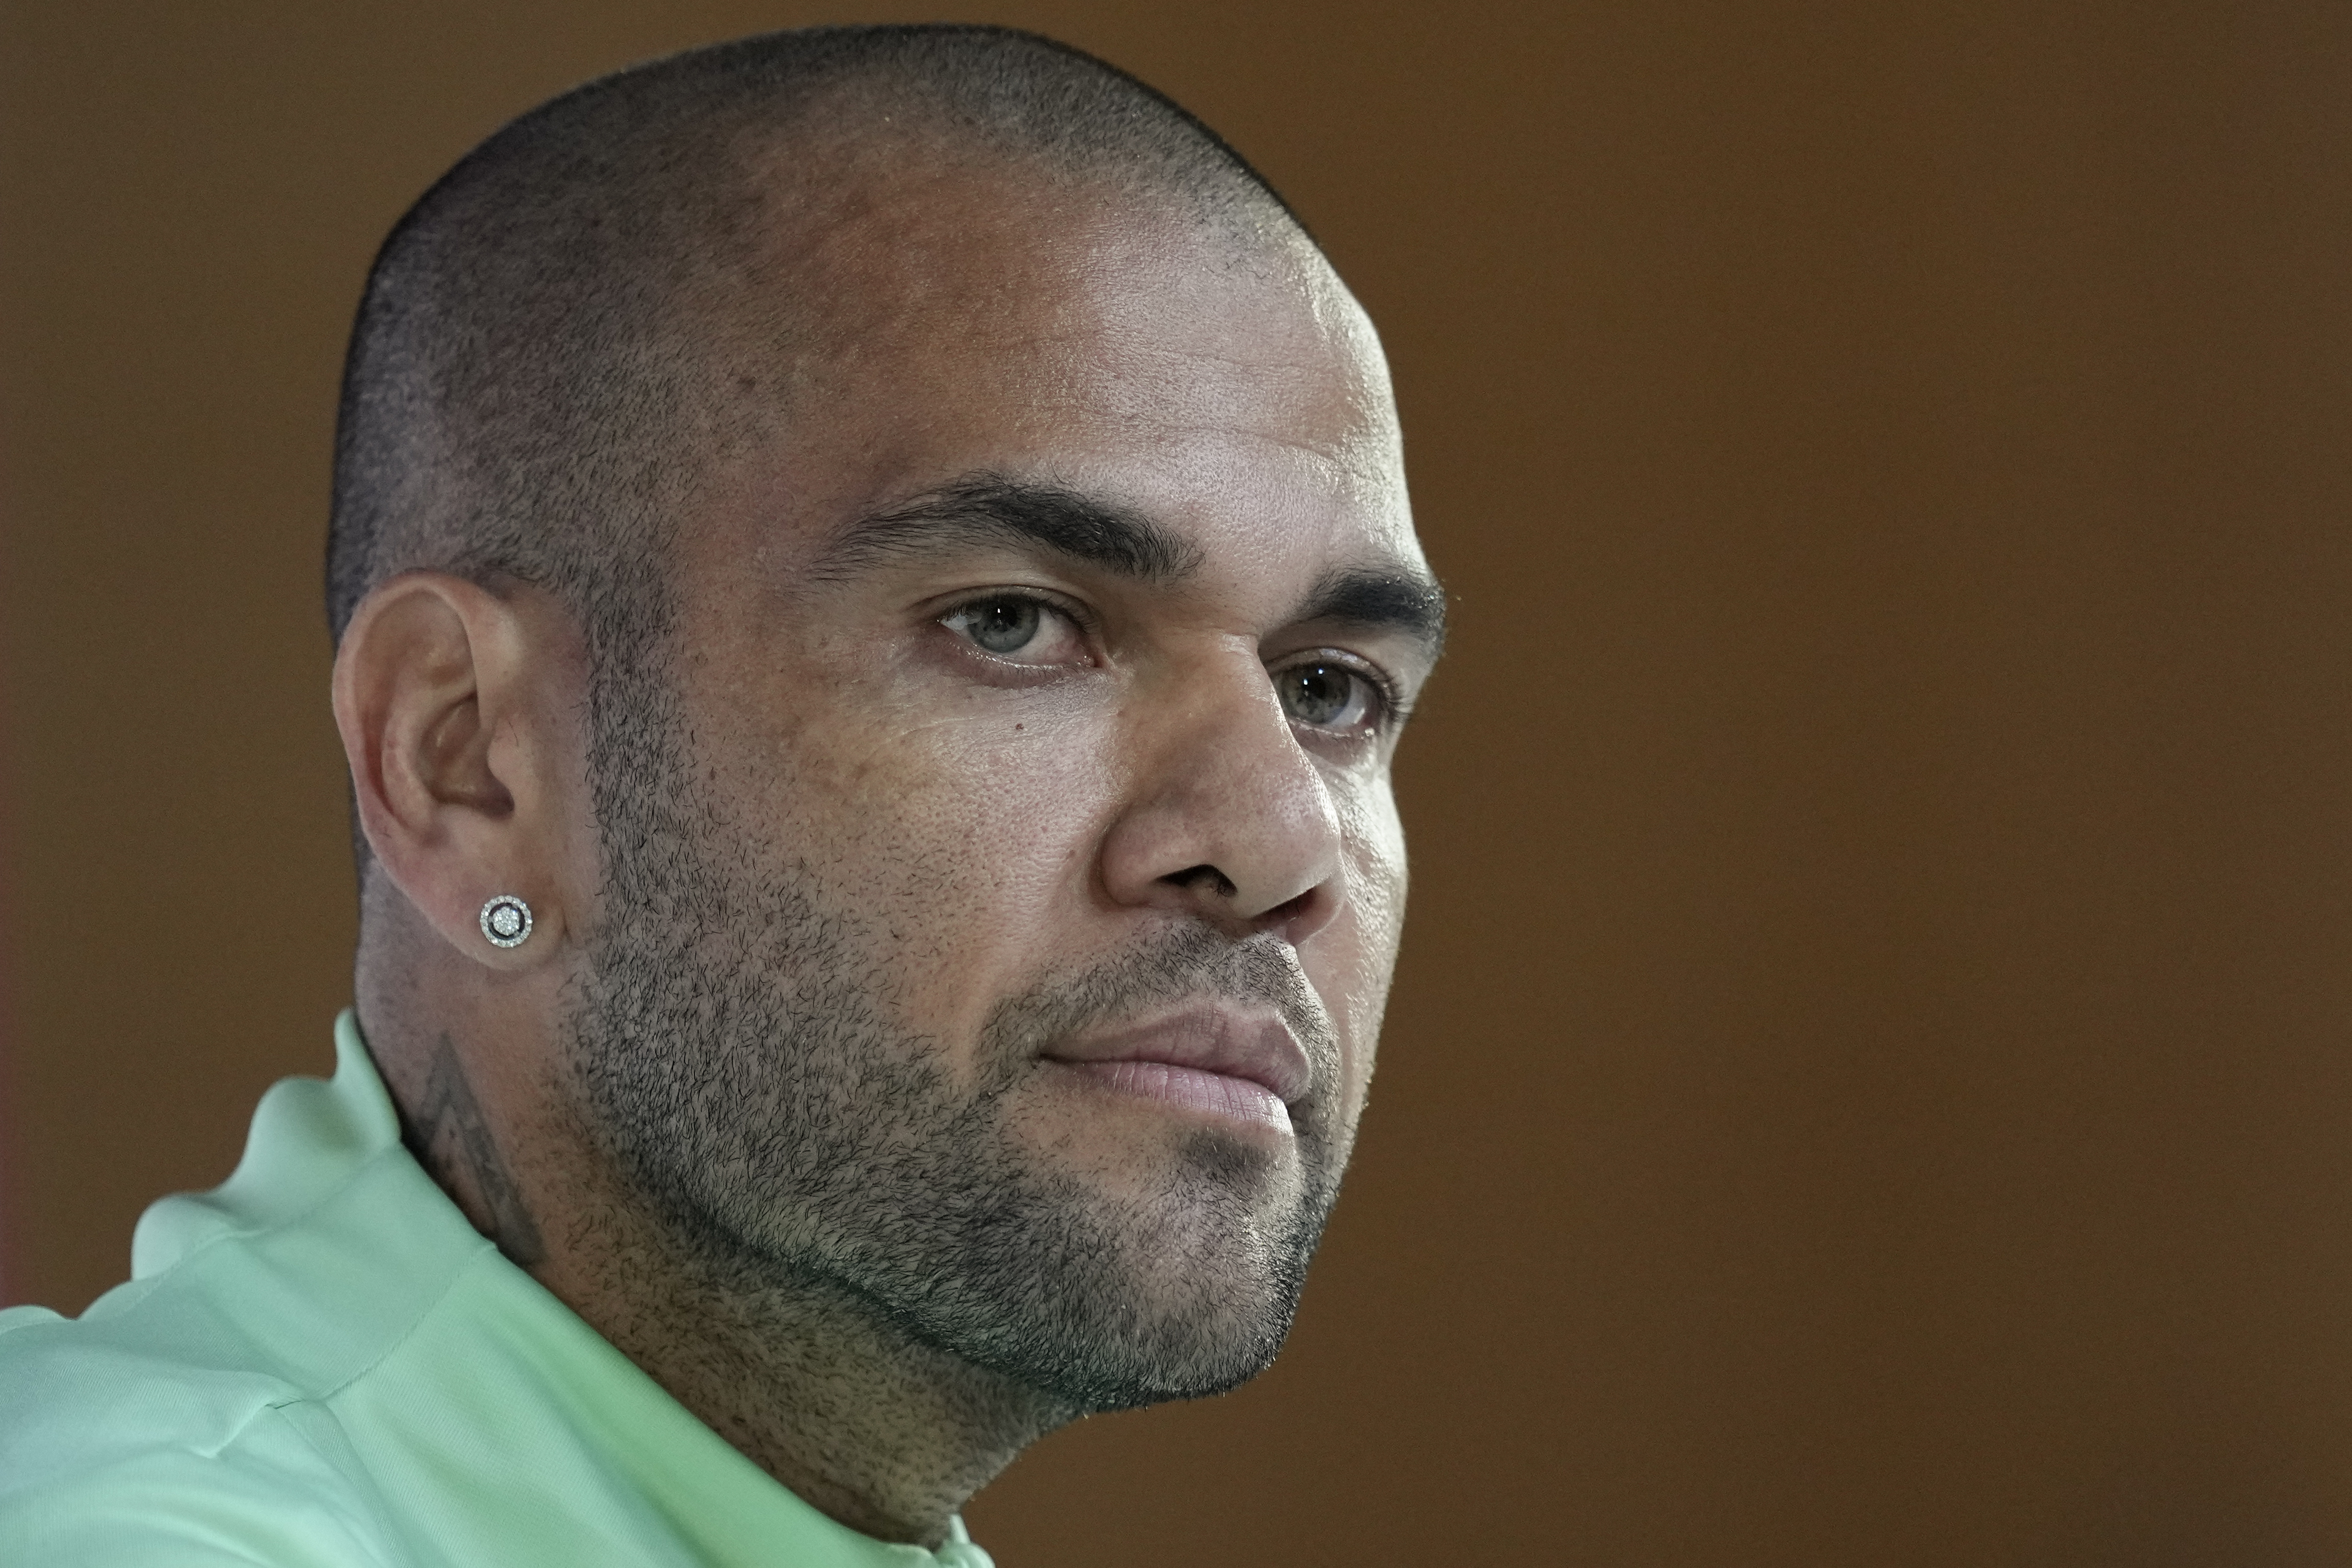 In this file photo, Brazilian soccer player Dani Alves listens to a question during a news conference before a Qatar World Cup Group G match between Brazil and Cameroon, in Doha, Qatar, December 1, 2022. (AP Photo /Andre Penner, file)